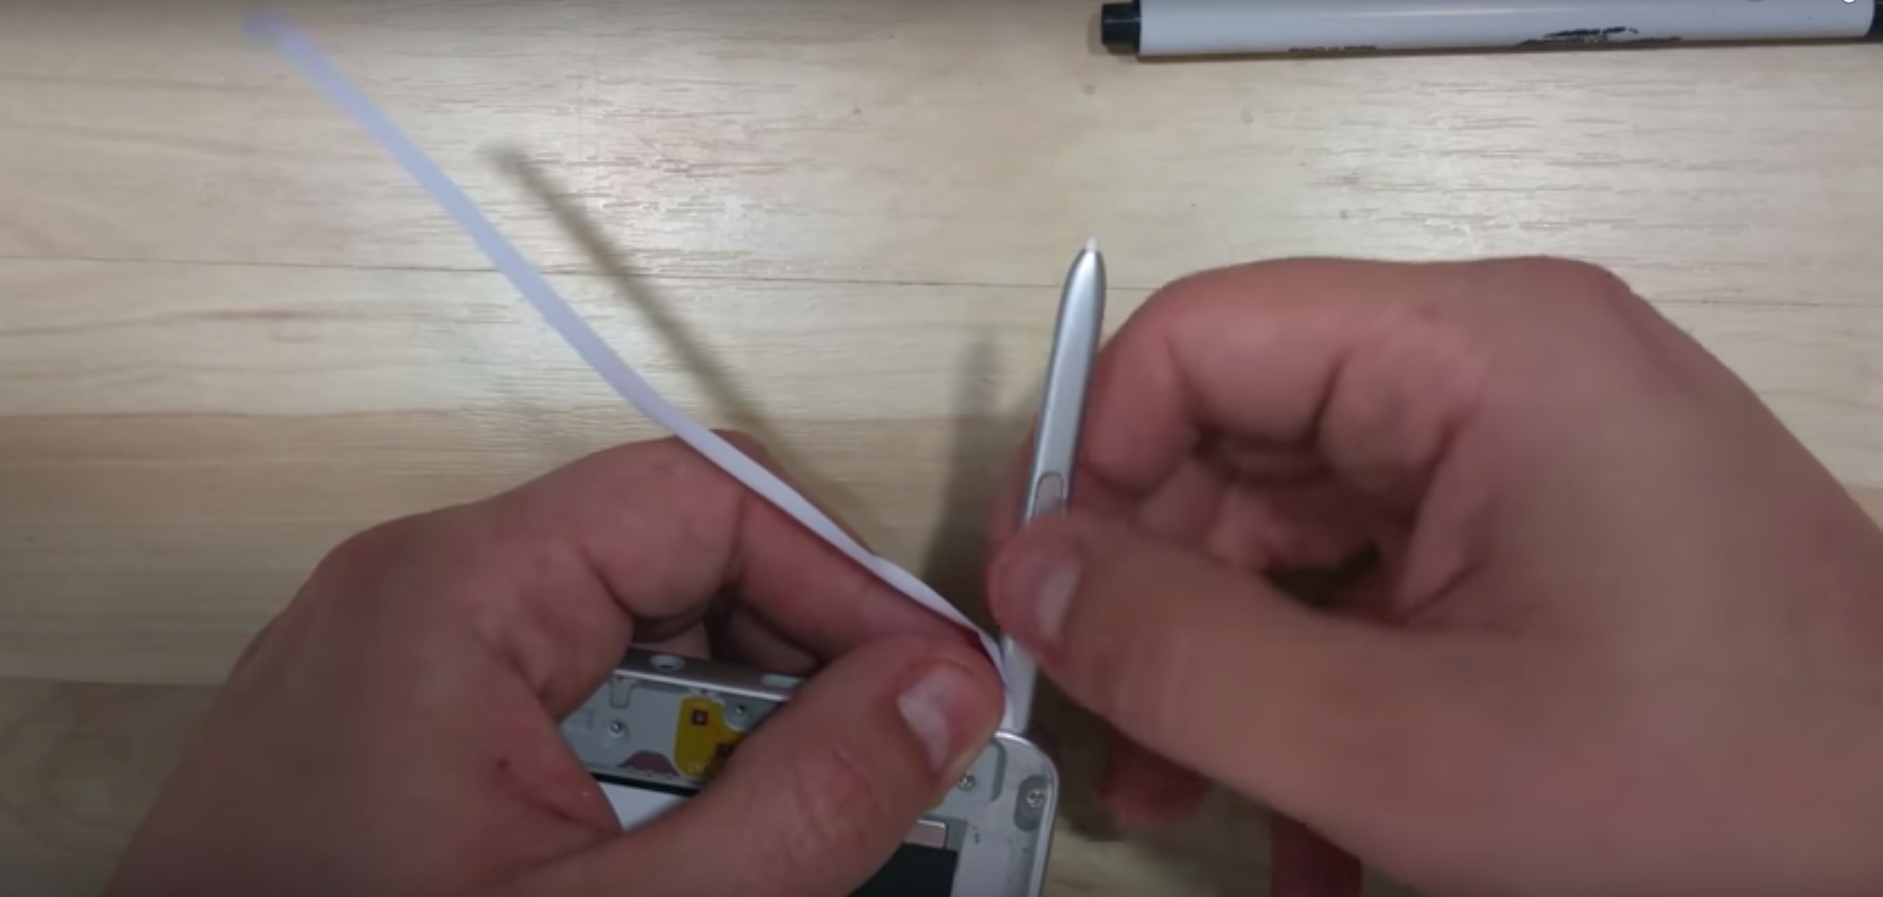 How to Fix It When Your S Pen Is Not Working